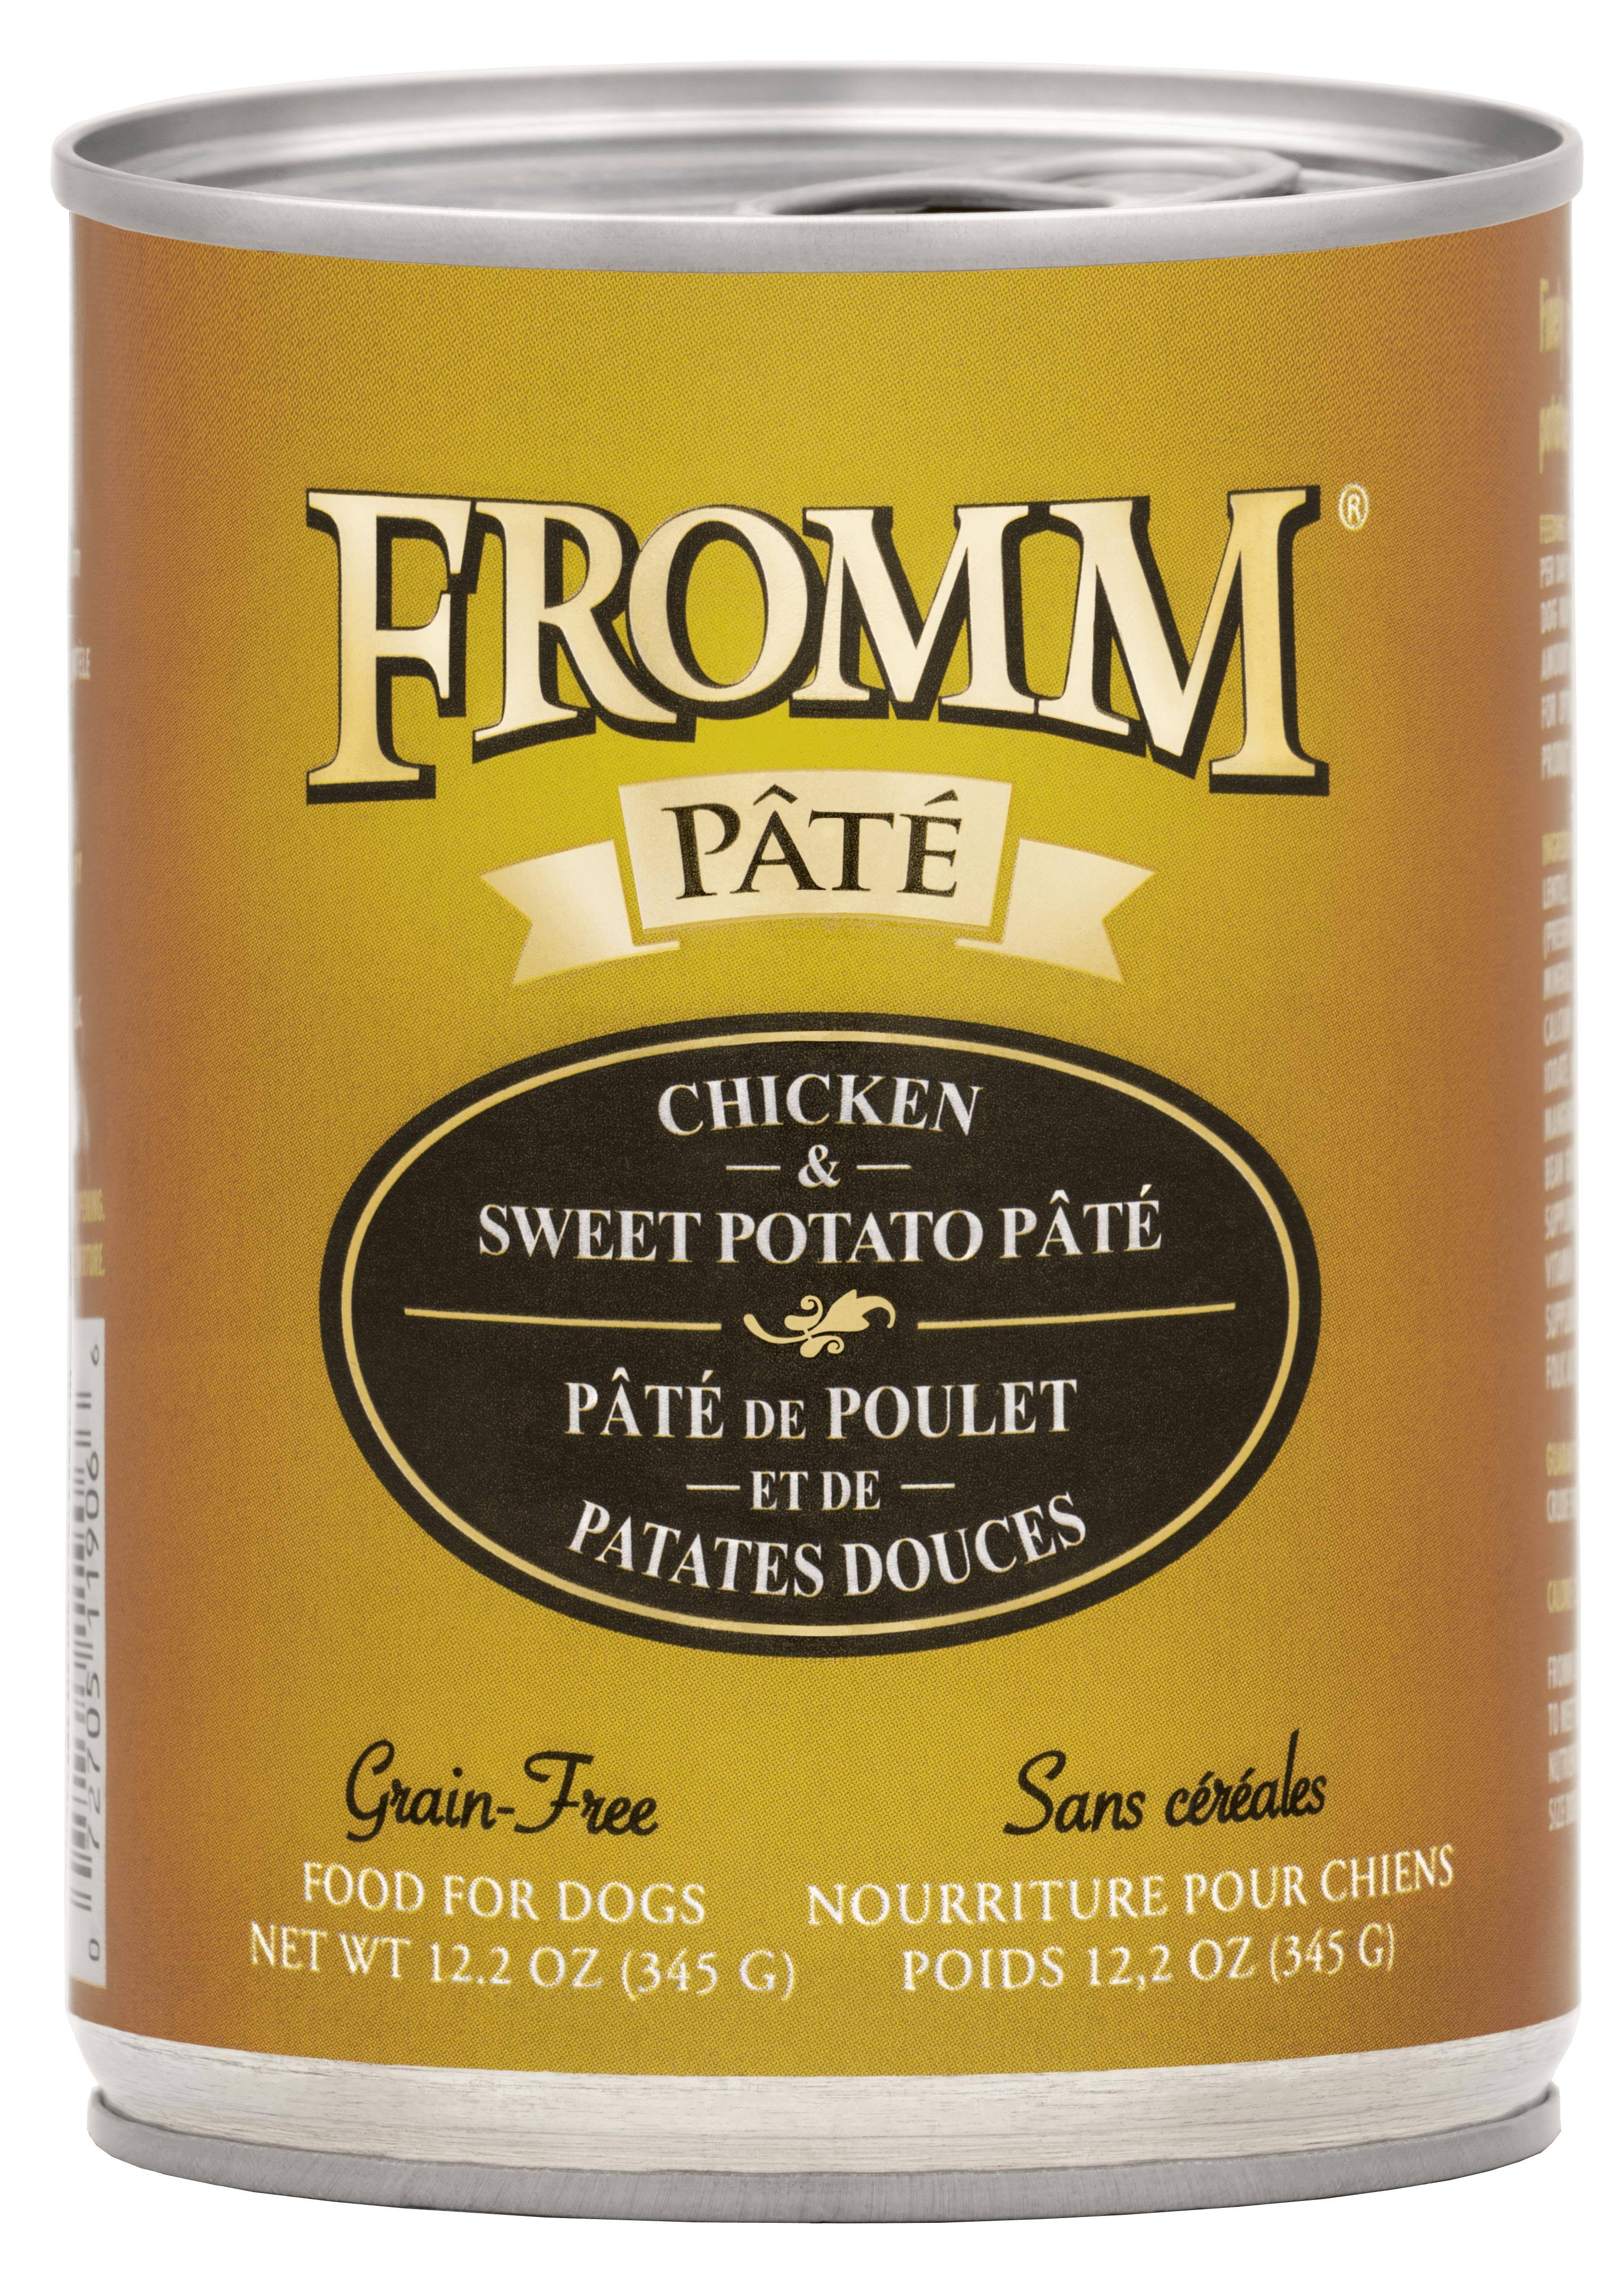 Fromm Chicken & Sweet Potato Pate Canned Dog Food - 12.2oz